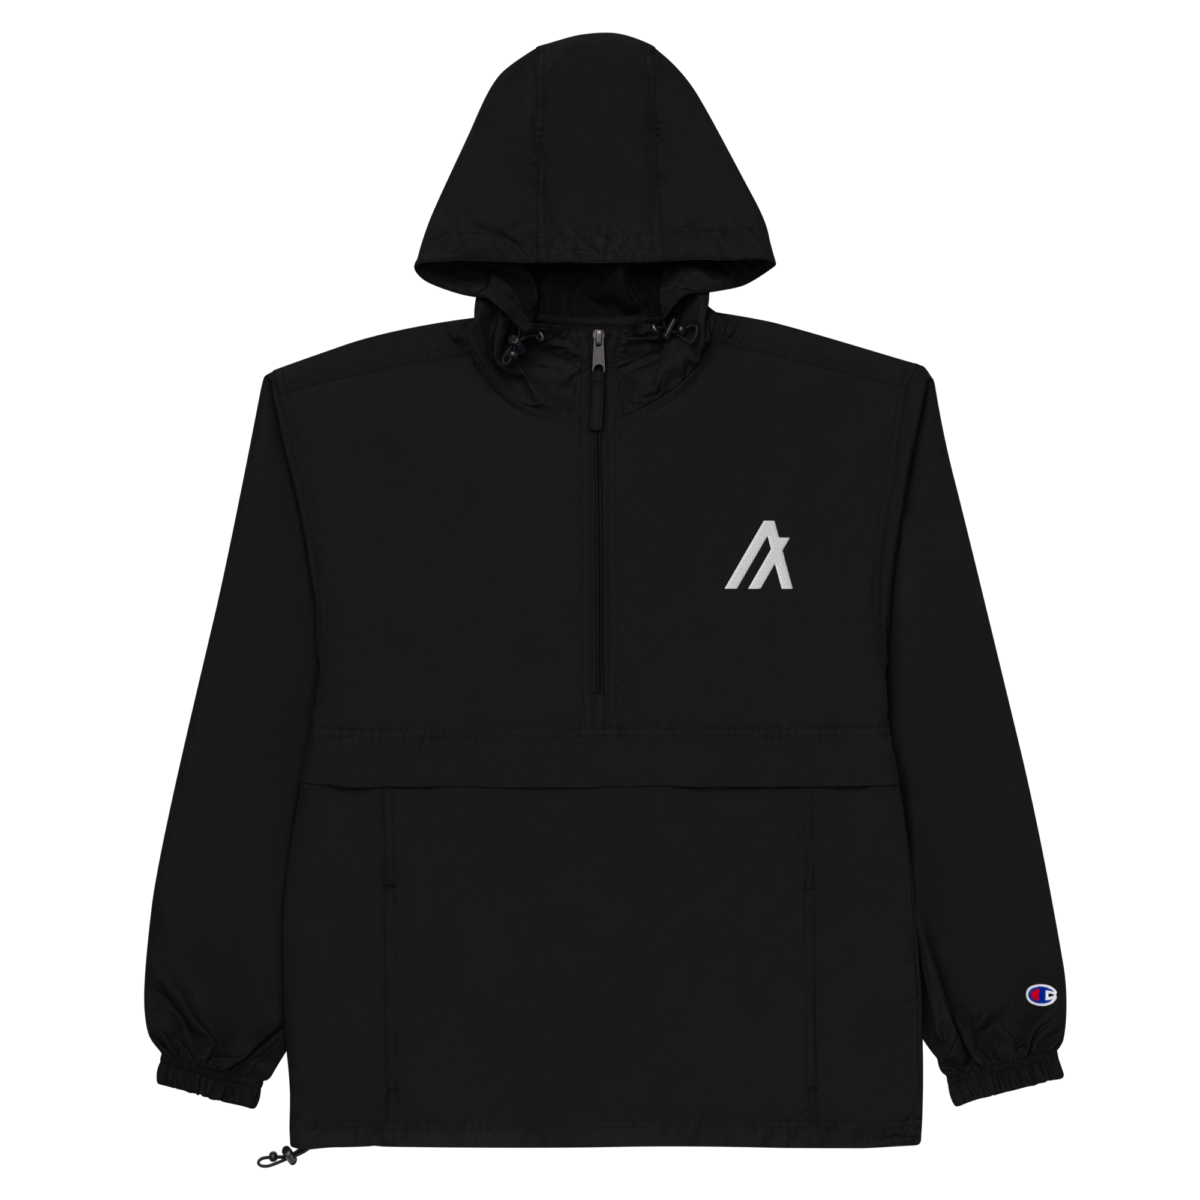 embroidered champion packable jacket black front 631f453eeda3a - Algorand Champion Packable Jacket